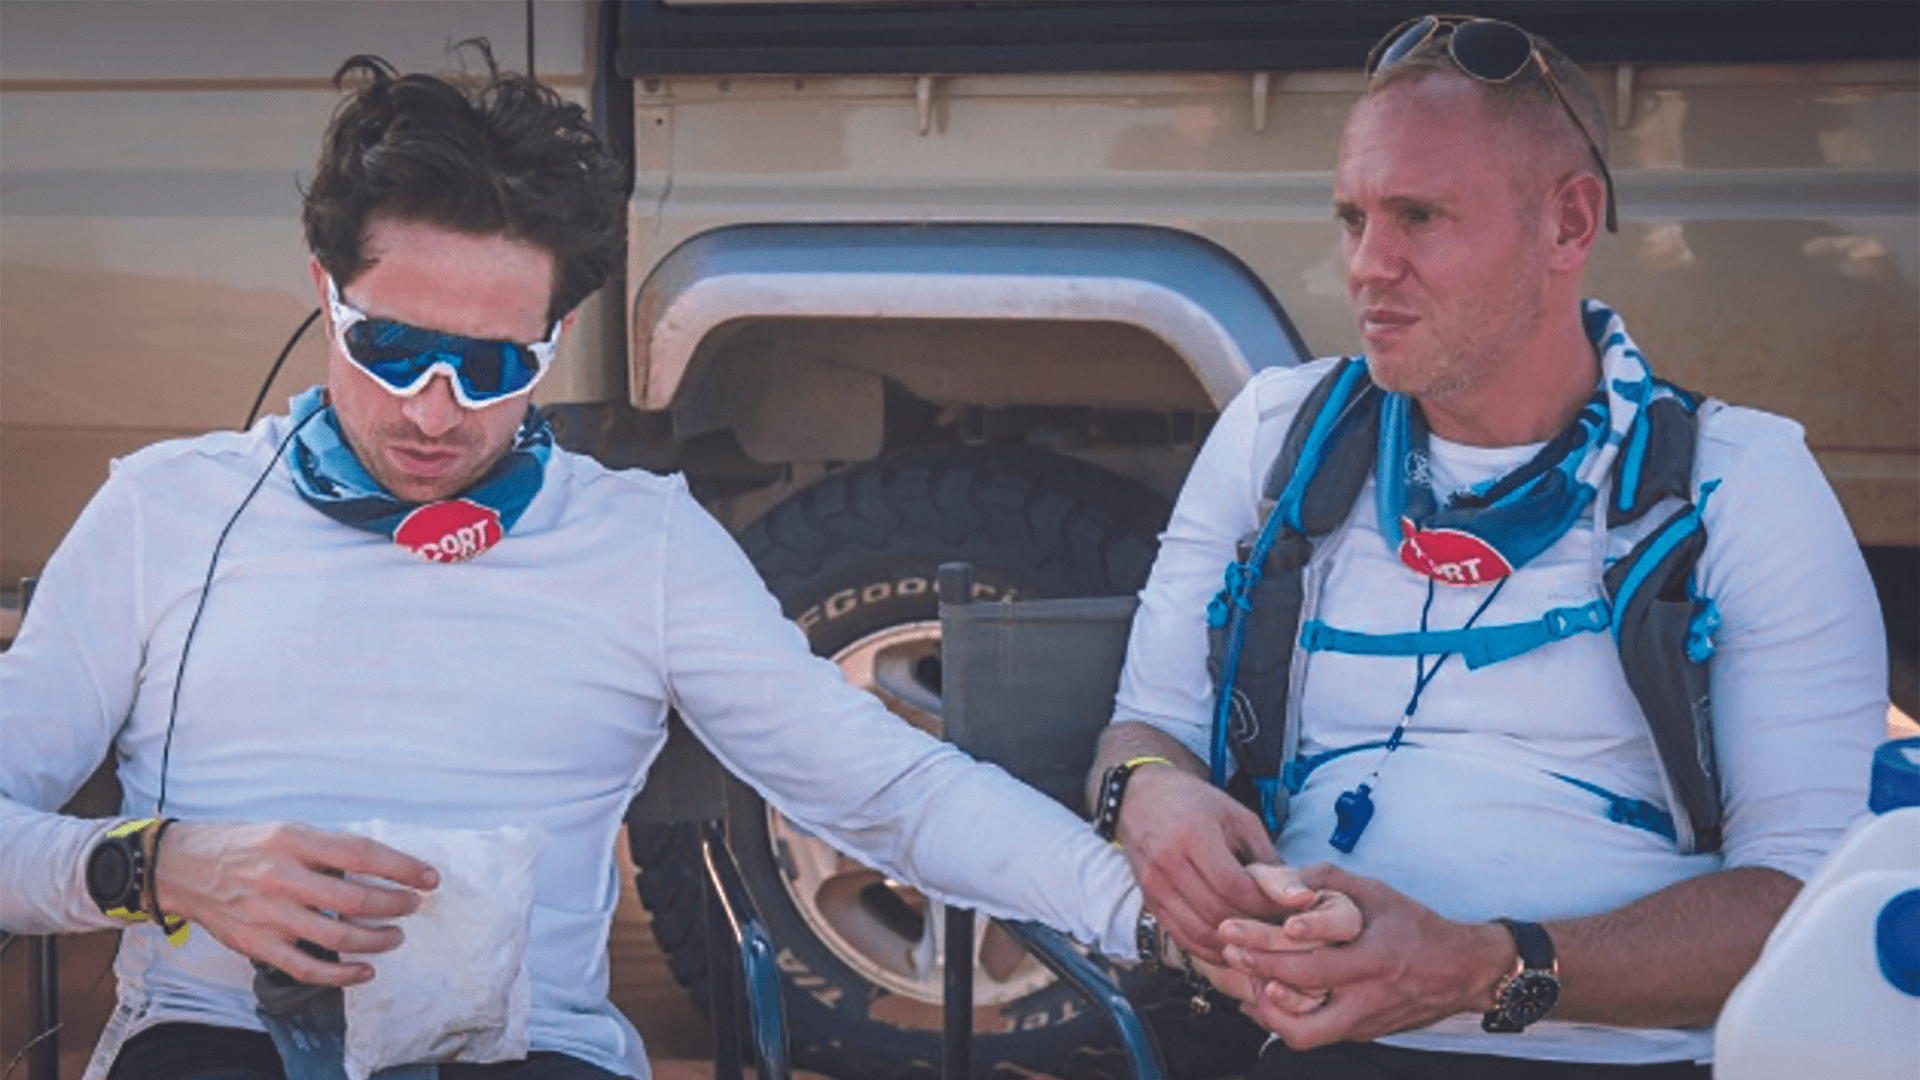 Nick Grimshaw (TV and radio presenter) and Rob Rinder (ITV’s Judge Rinder) during their gruelling 100-mile expedition across the Namib Desert in aid of Sport Relief in 2020.